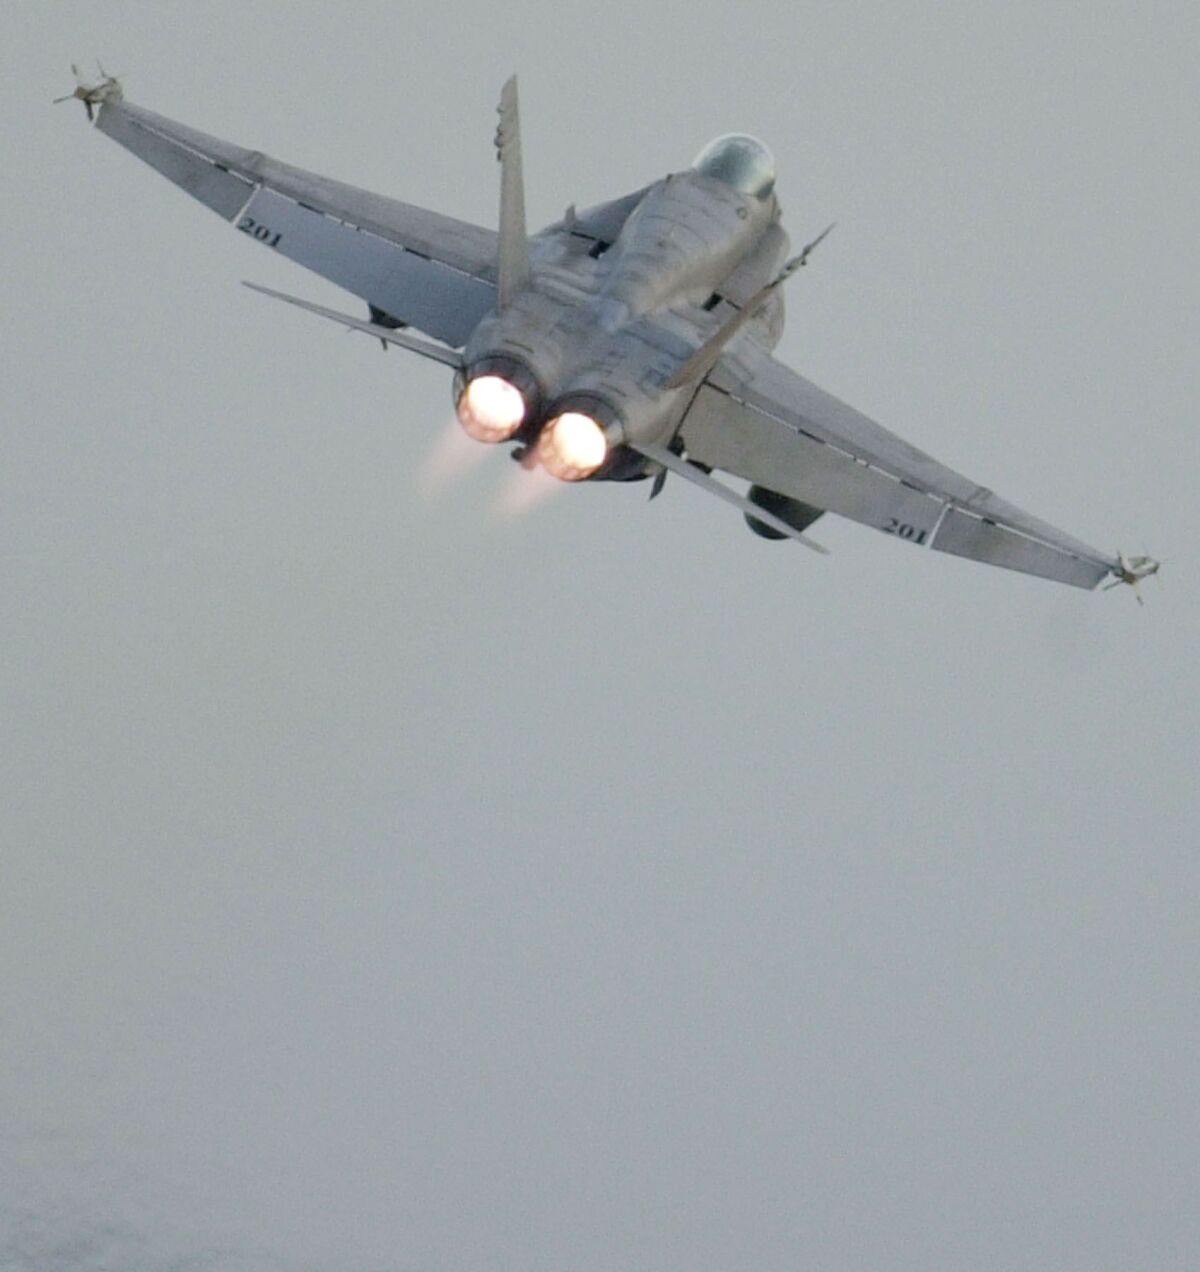 A U.S. Navy F/A-18C Hornet fighter, the same model aircraft as one that recently crashed in Nevada, takes off on a strike mission from the aircraft carrier USS Theodore Roosevelt in the Arabian Sea in this file photo.